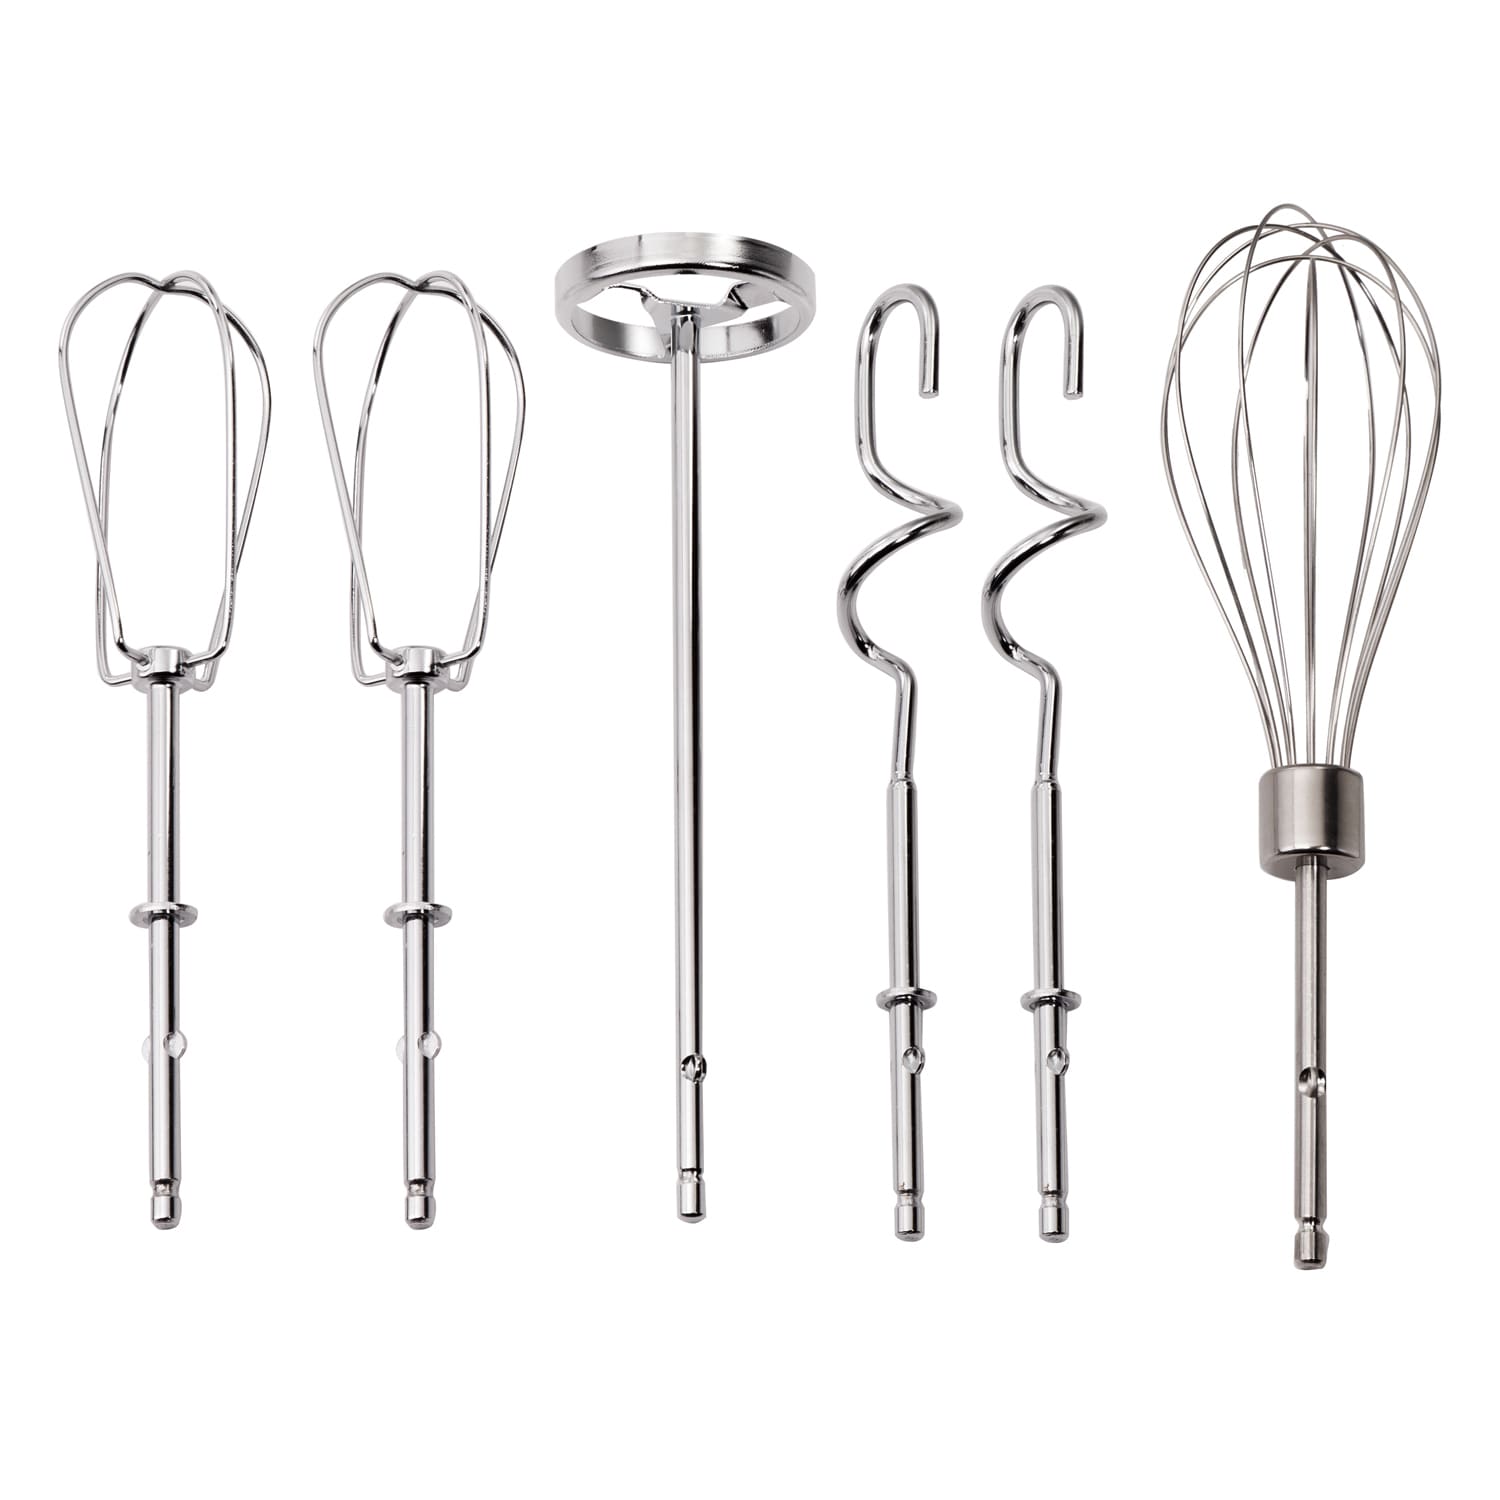 https://ak1.ostkcdn.com/images/products/9272385/6-SPEED-HAND-MIXER-WITH-CASE-PERPNEW-PULSE-FEATURE-4fd1f120-ef1f-4032-952b-08476bbe7a62.jpg